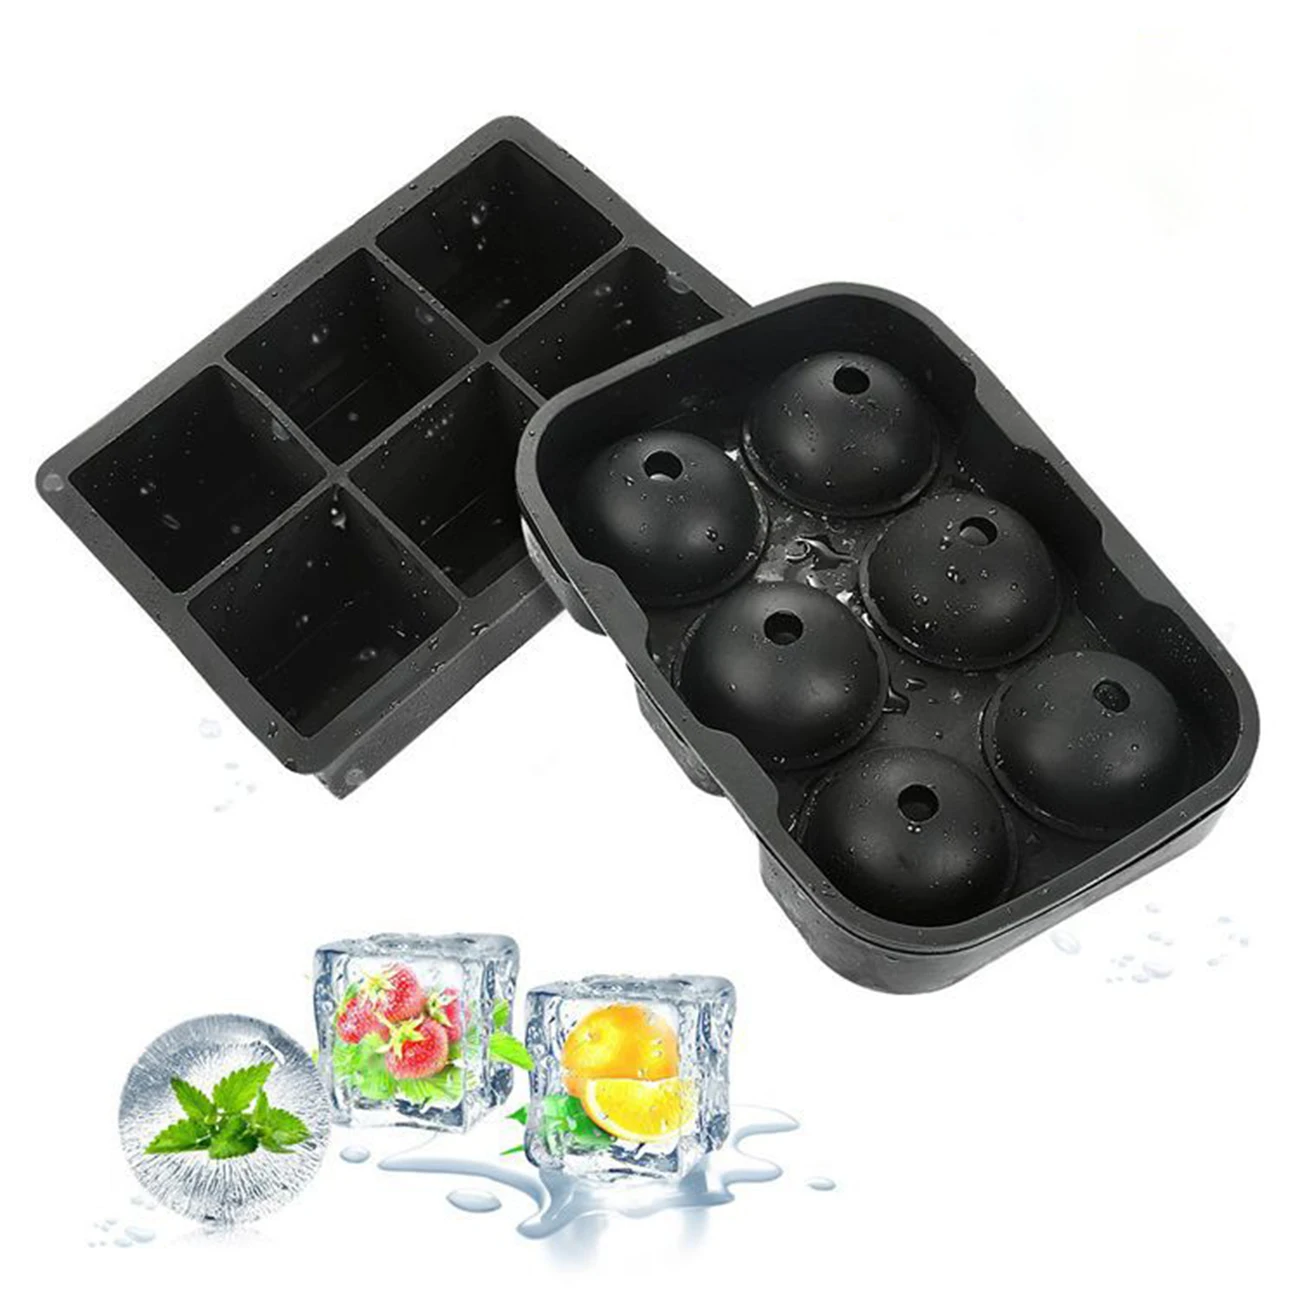 

6 Cell Ice Ball Mold Camping Cooler Silicone Ice Cube Trays Whiskey Ice Ball Maker Silicone Molds Maker Camp Cooking Supplies